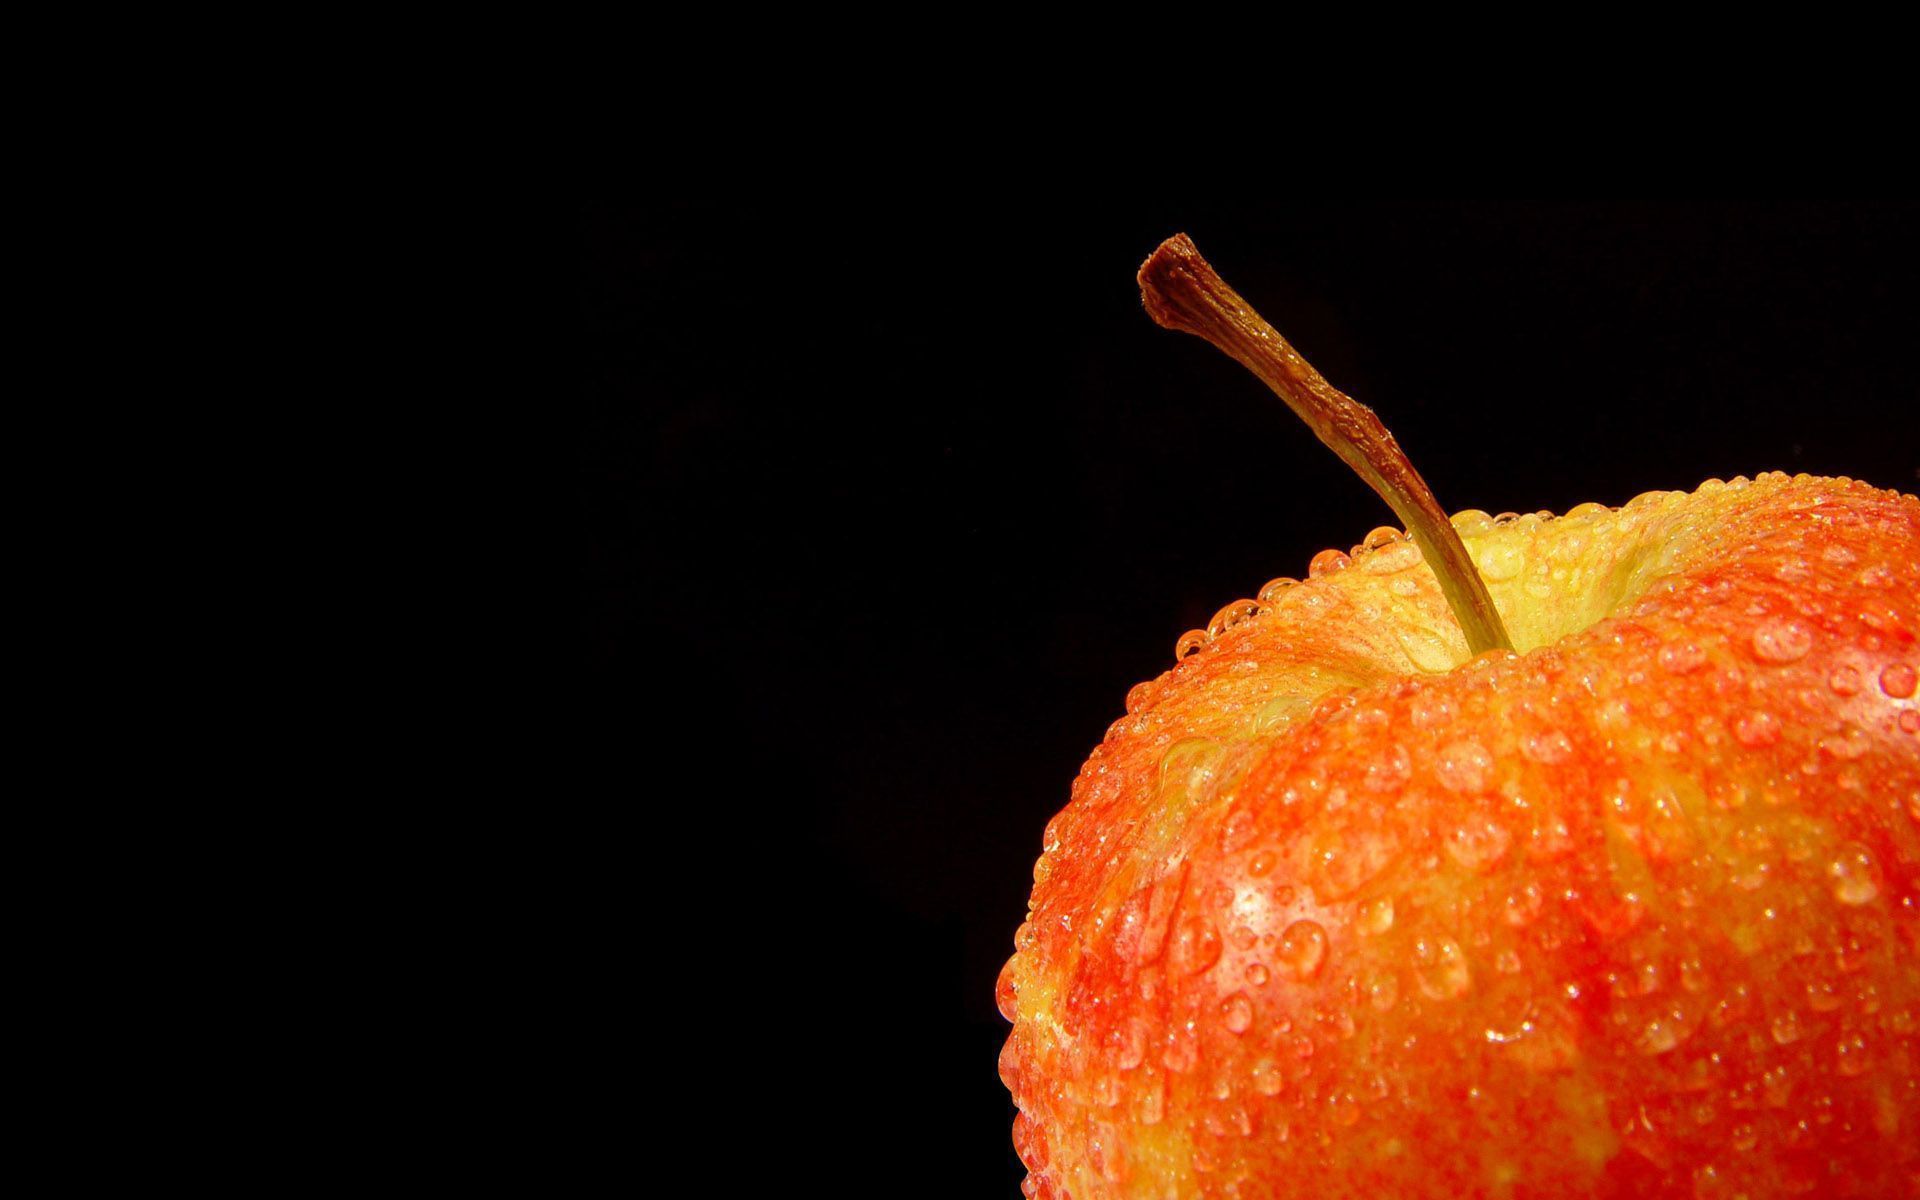 Apple on a black background wallpapers and images - wallpapers ...